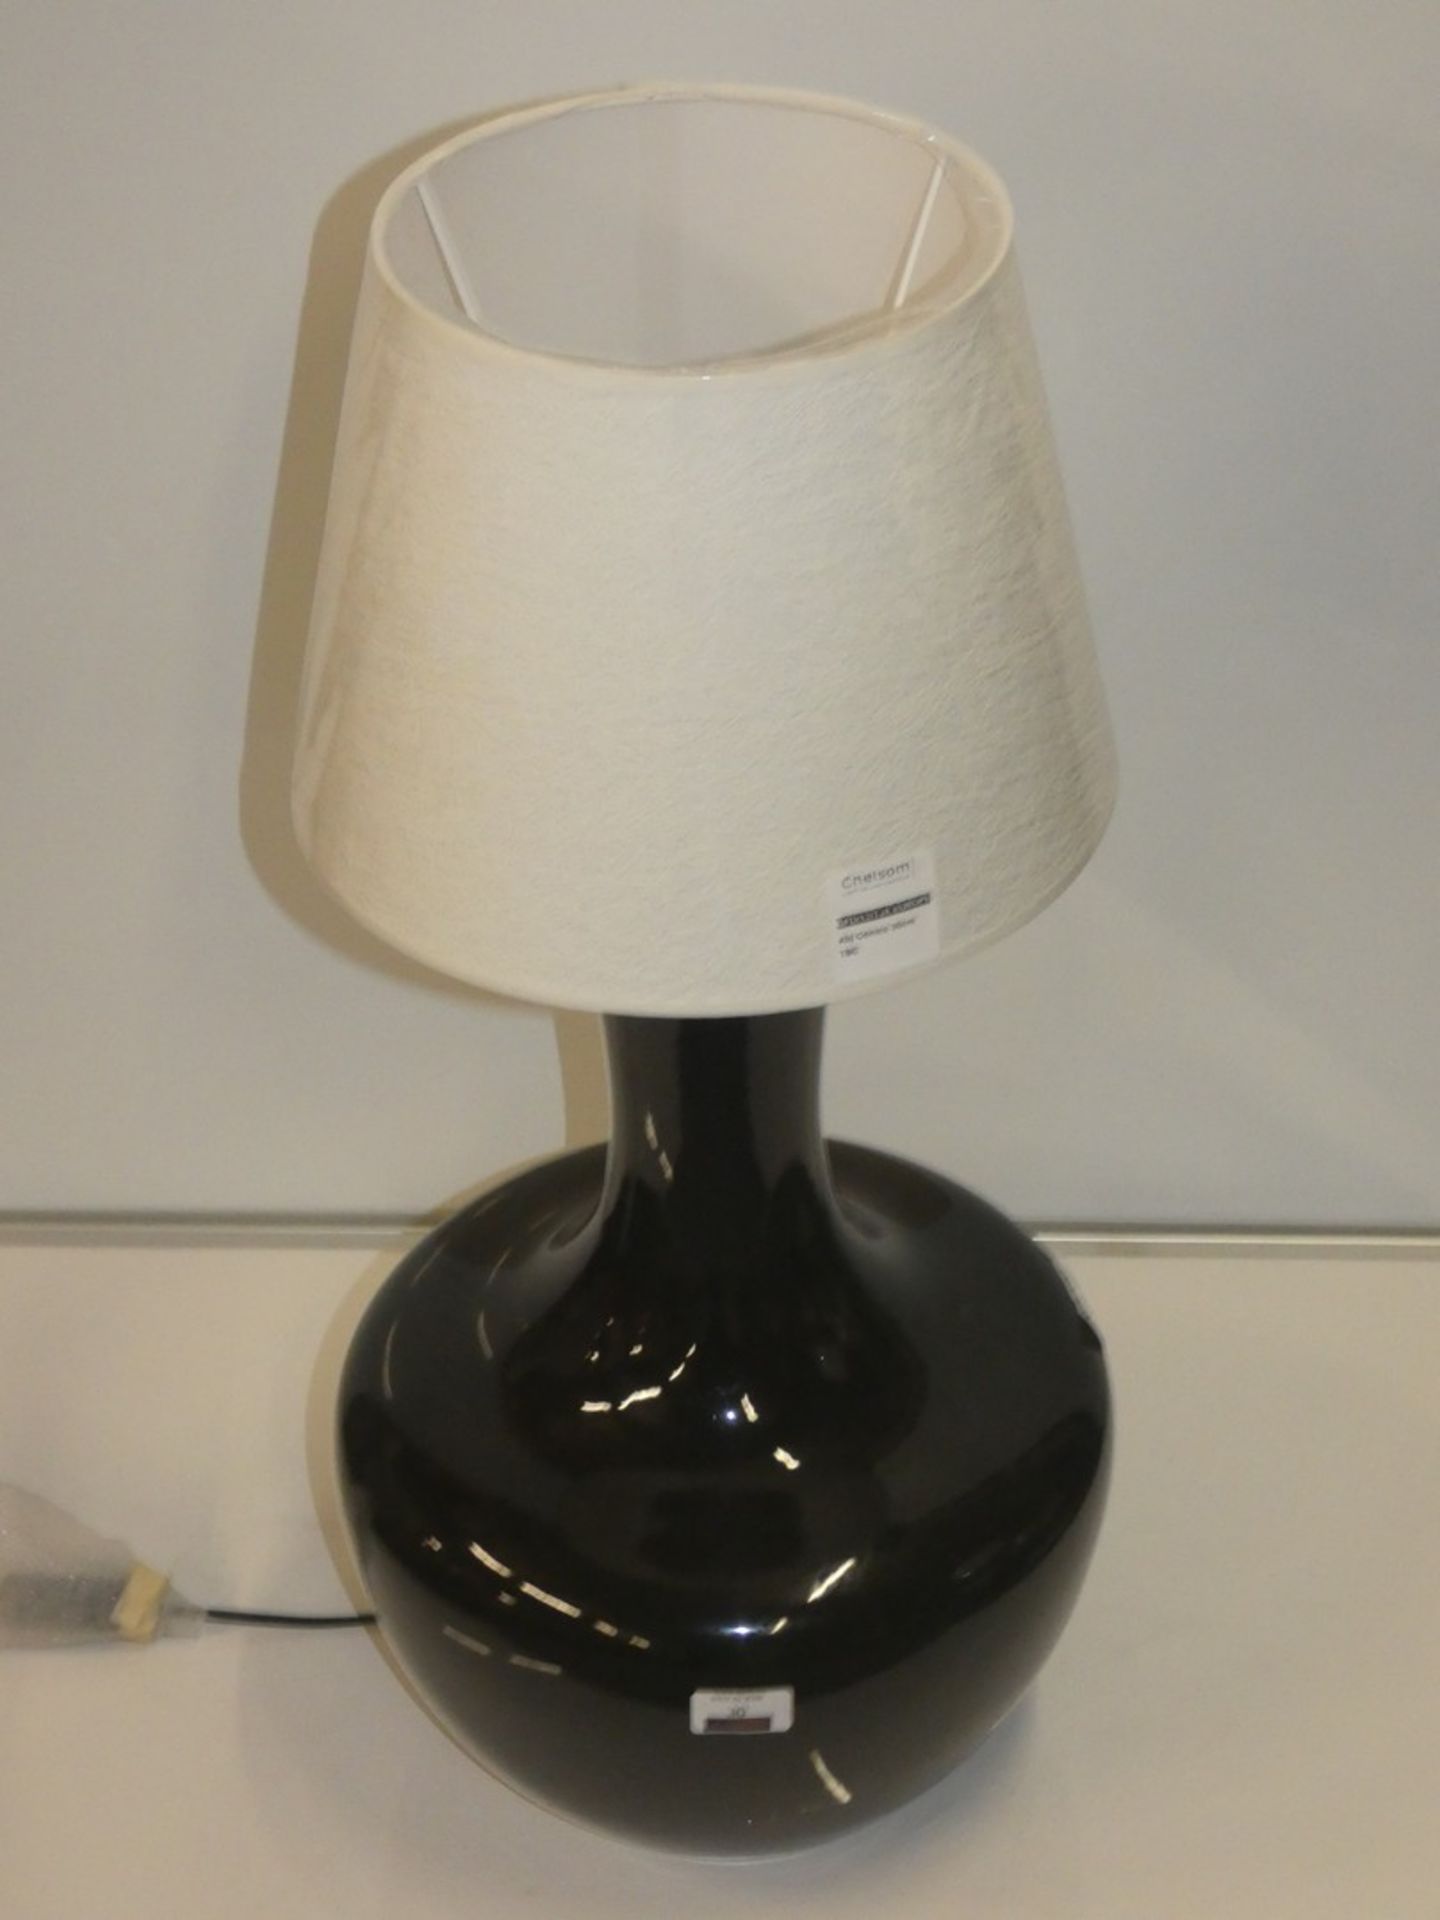 Black Vase Base Fabric Shade Designer Table Lamp From A High-End Lighting Company (Chelsom) RRP £